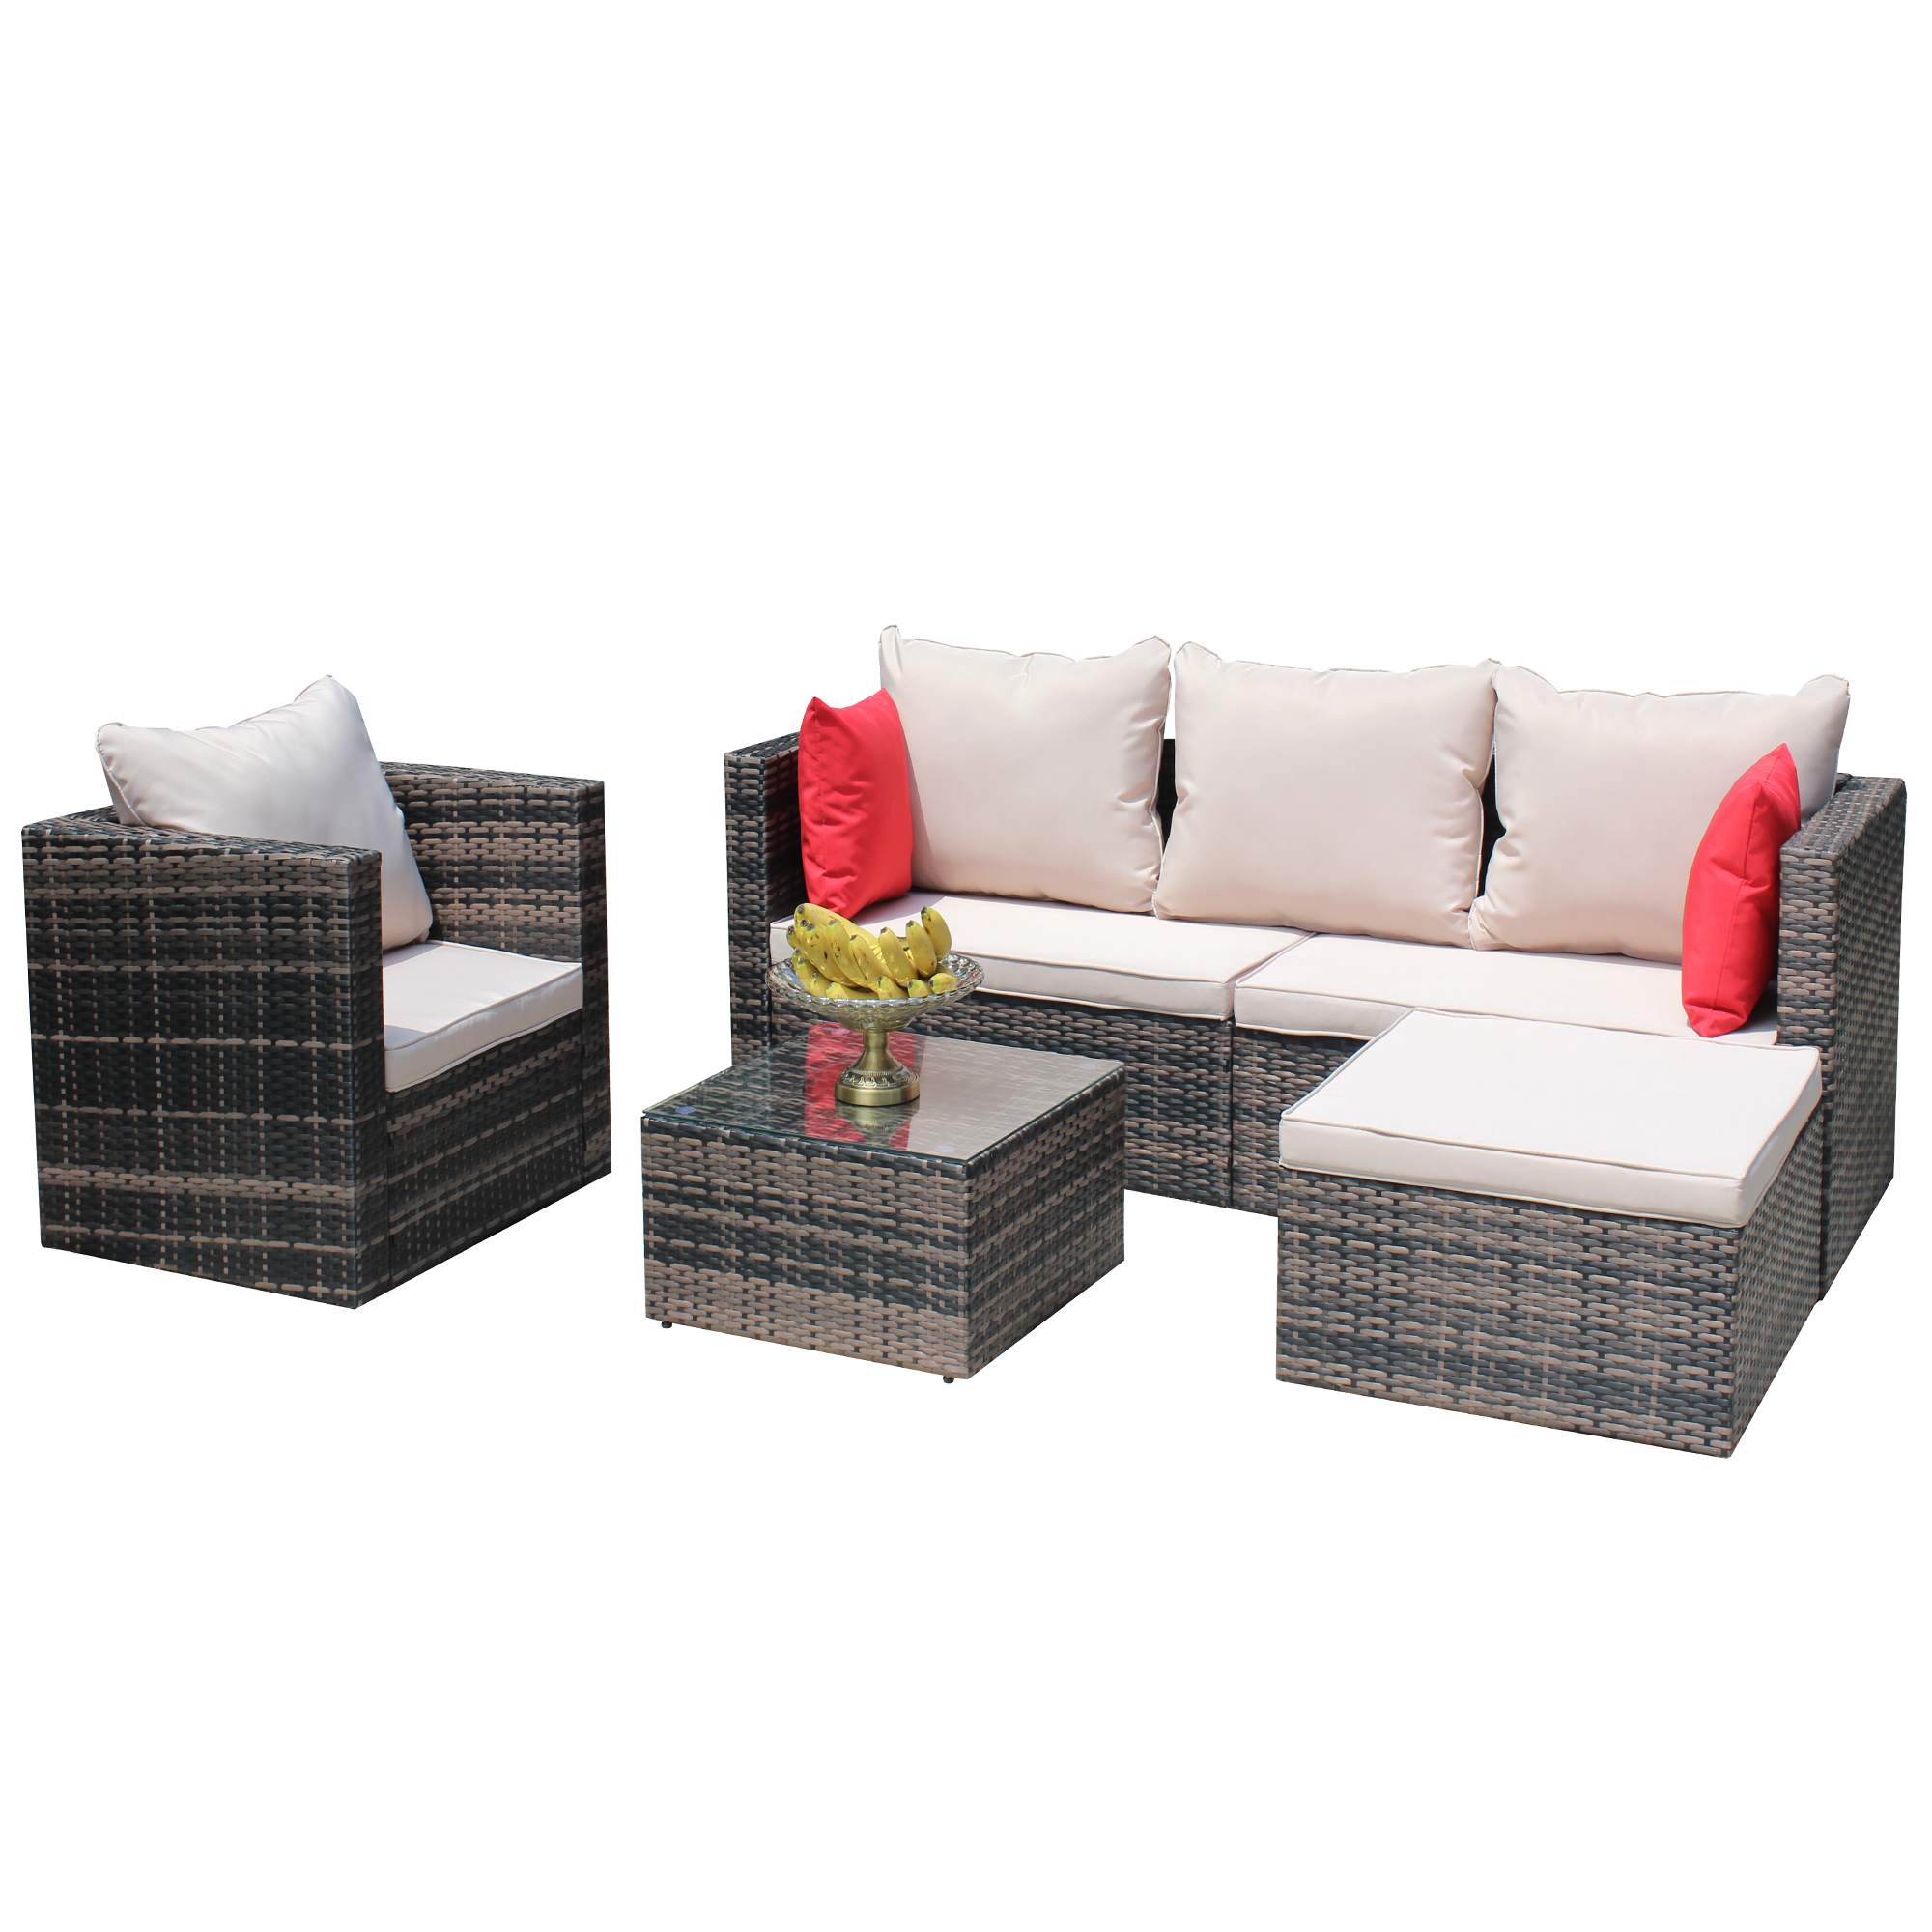 Outdoor Conversation Sets, 4 Piece Patio Furniture Sets with Wicker Chair, 3-Seat Sofa, Ottoman, Glass Table, All-Weather PE Rattan Patio Sectional Sofa Set for Backyard, Porch, Garden, Pool, L4487 - image 5 of 11